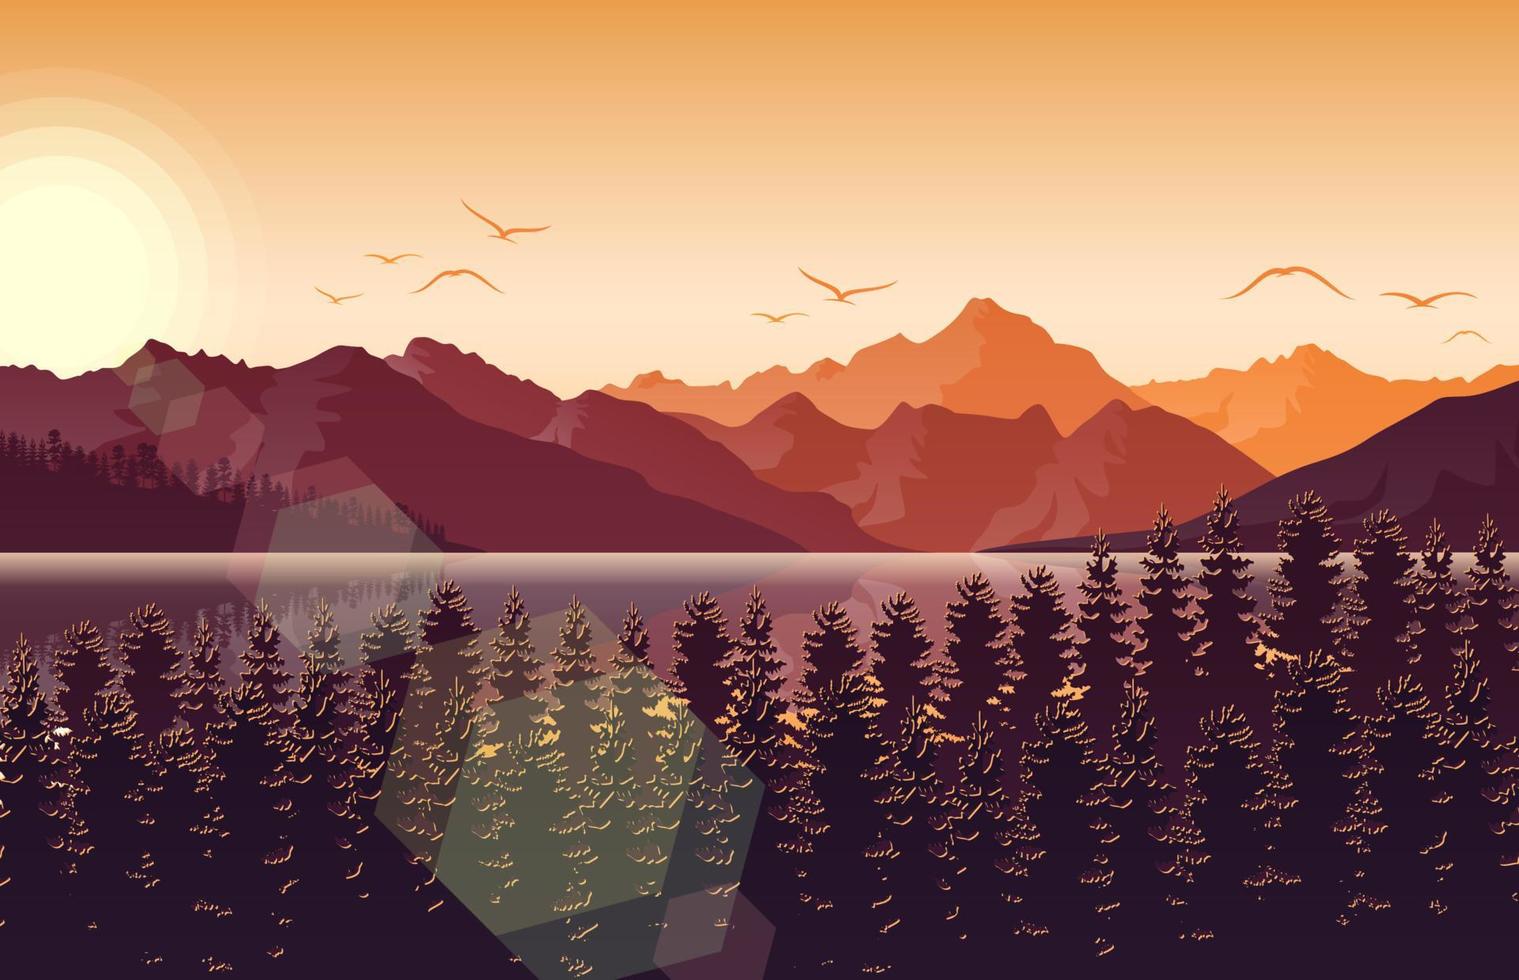 Mountain landscape with deer and forest at sunset vector